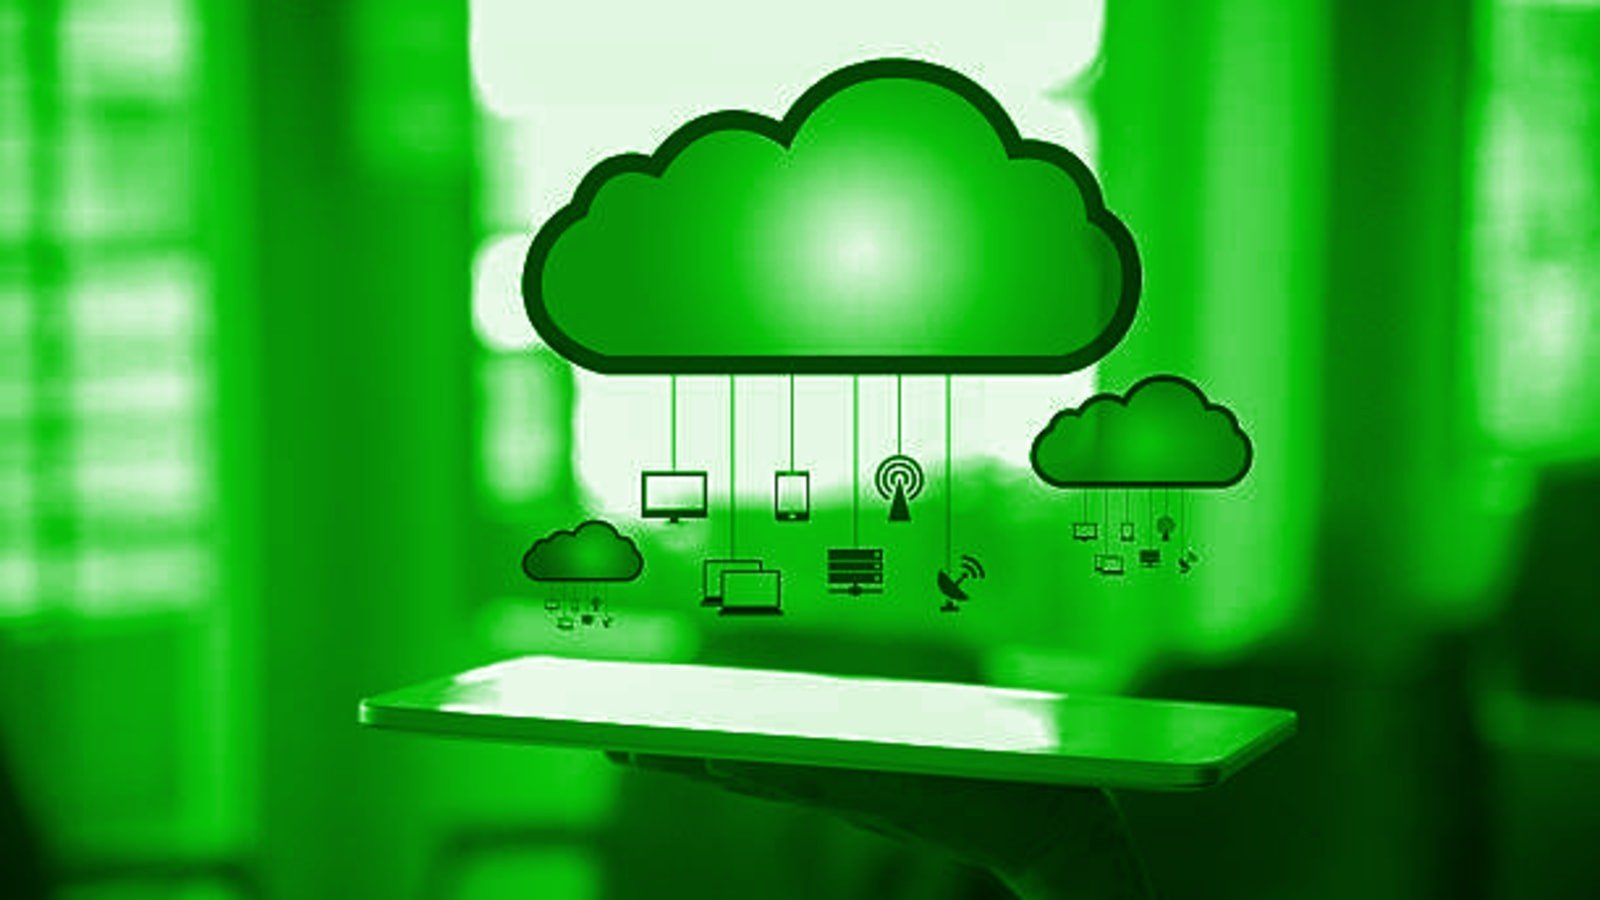 Green Cloud Tools - Learn More About this Technology